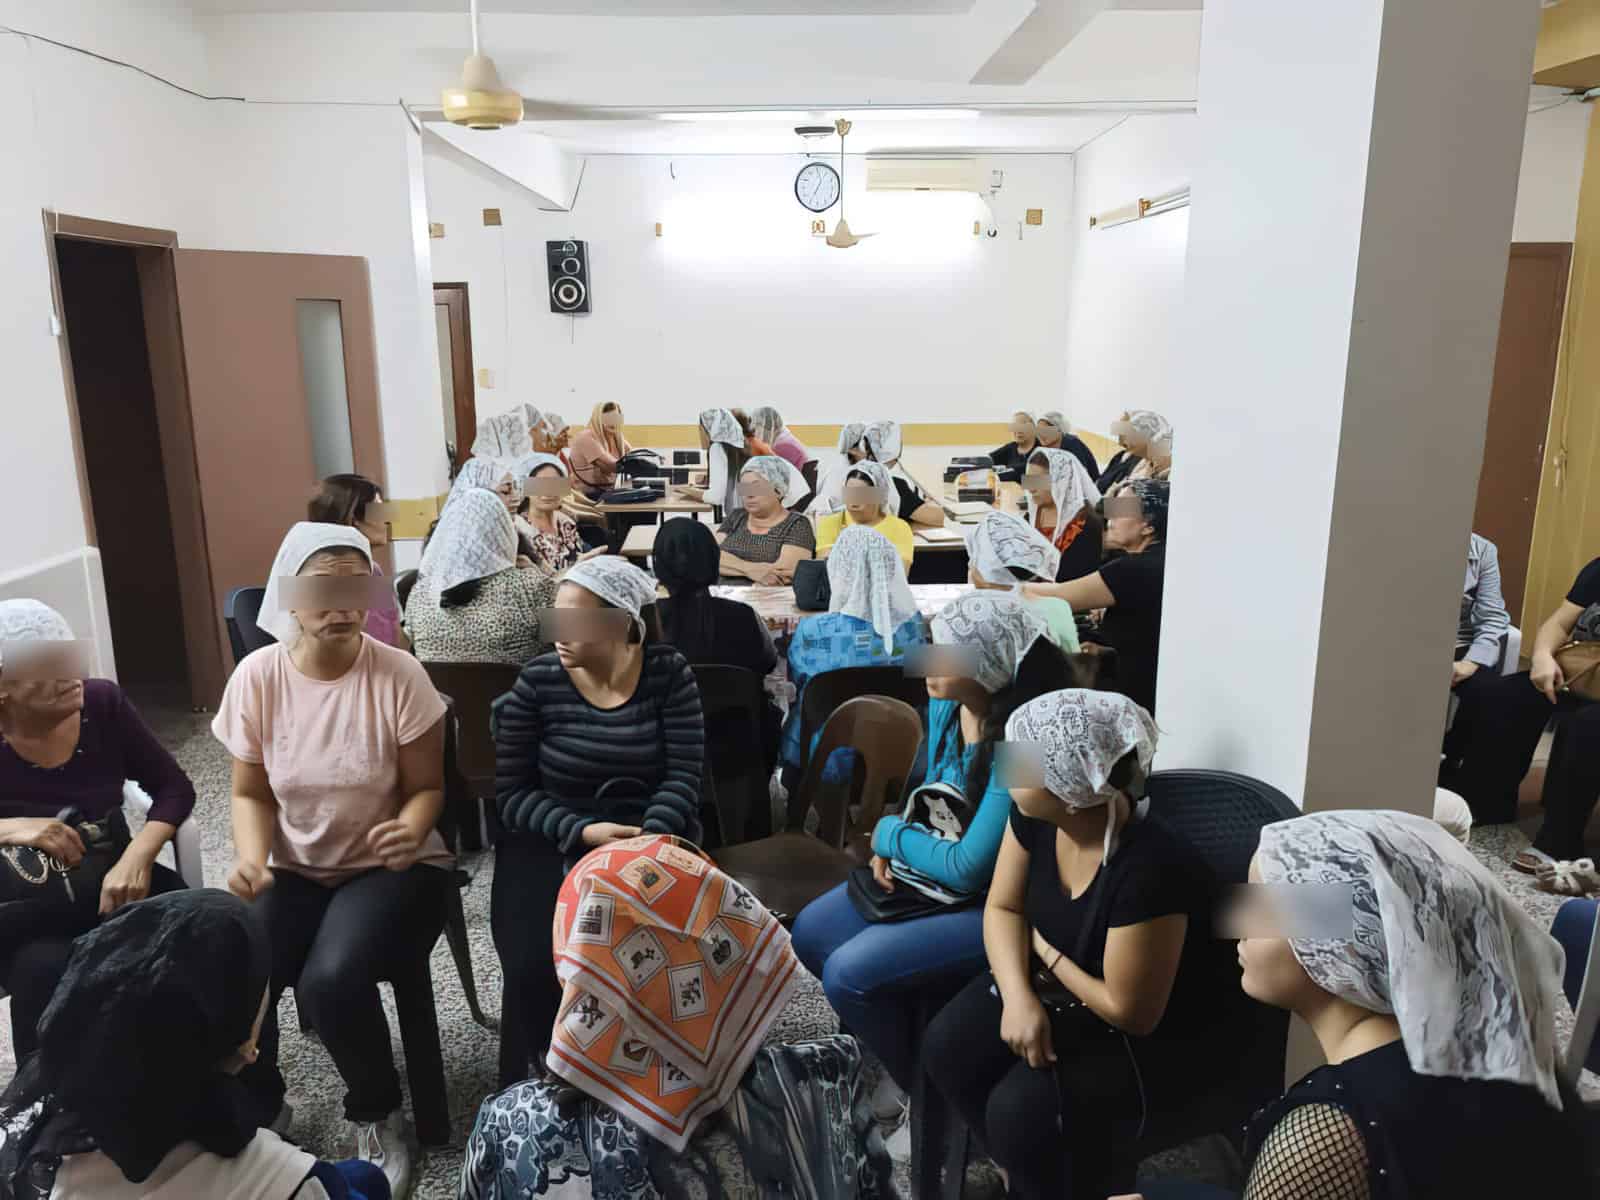 Murshid ladies (who were once unreached), approximately 30, who have already been evangelized sit in a white walled room in charis, some at tables in midst conversation with on another.